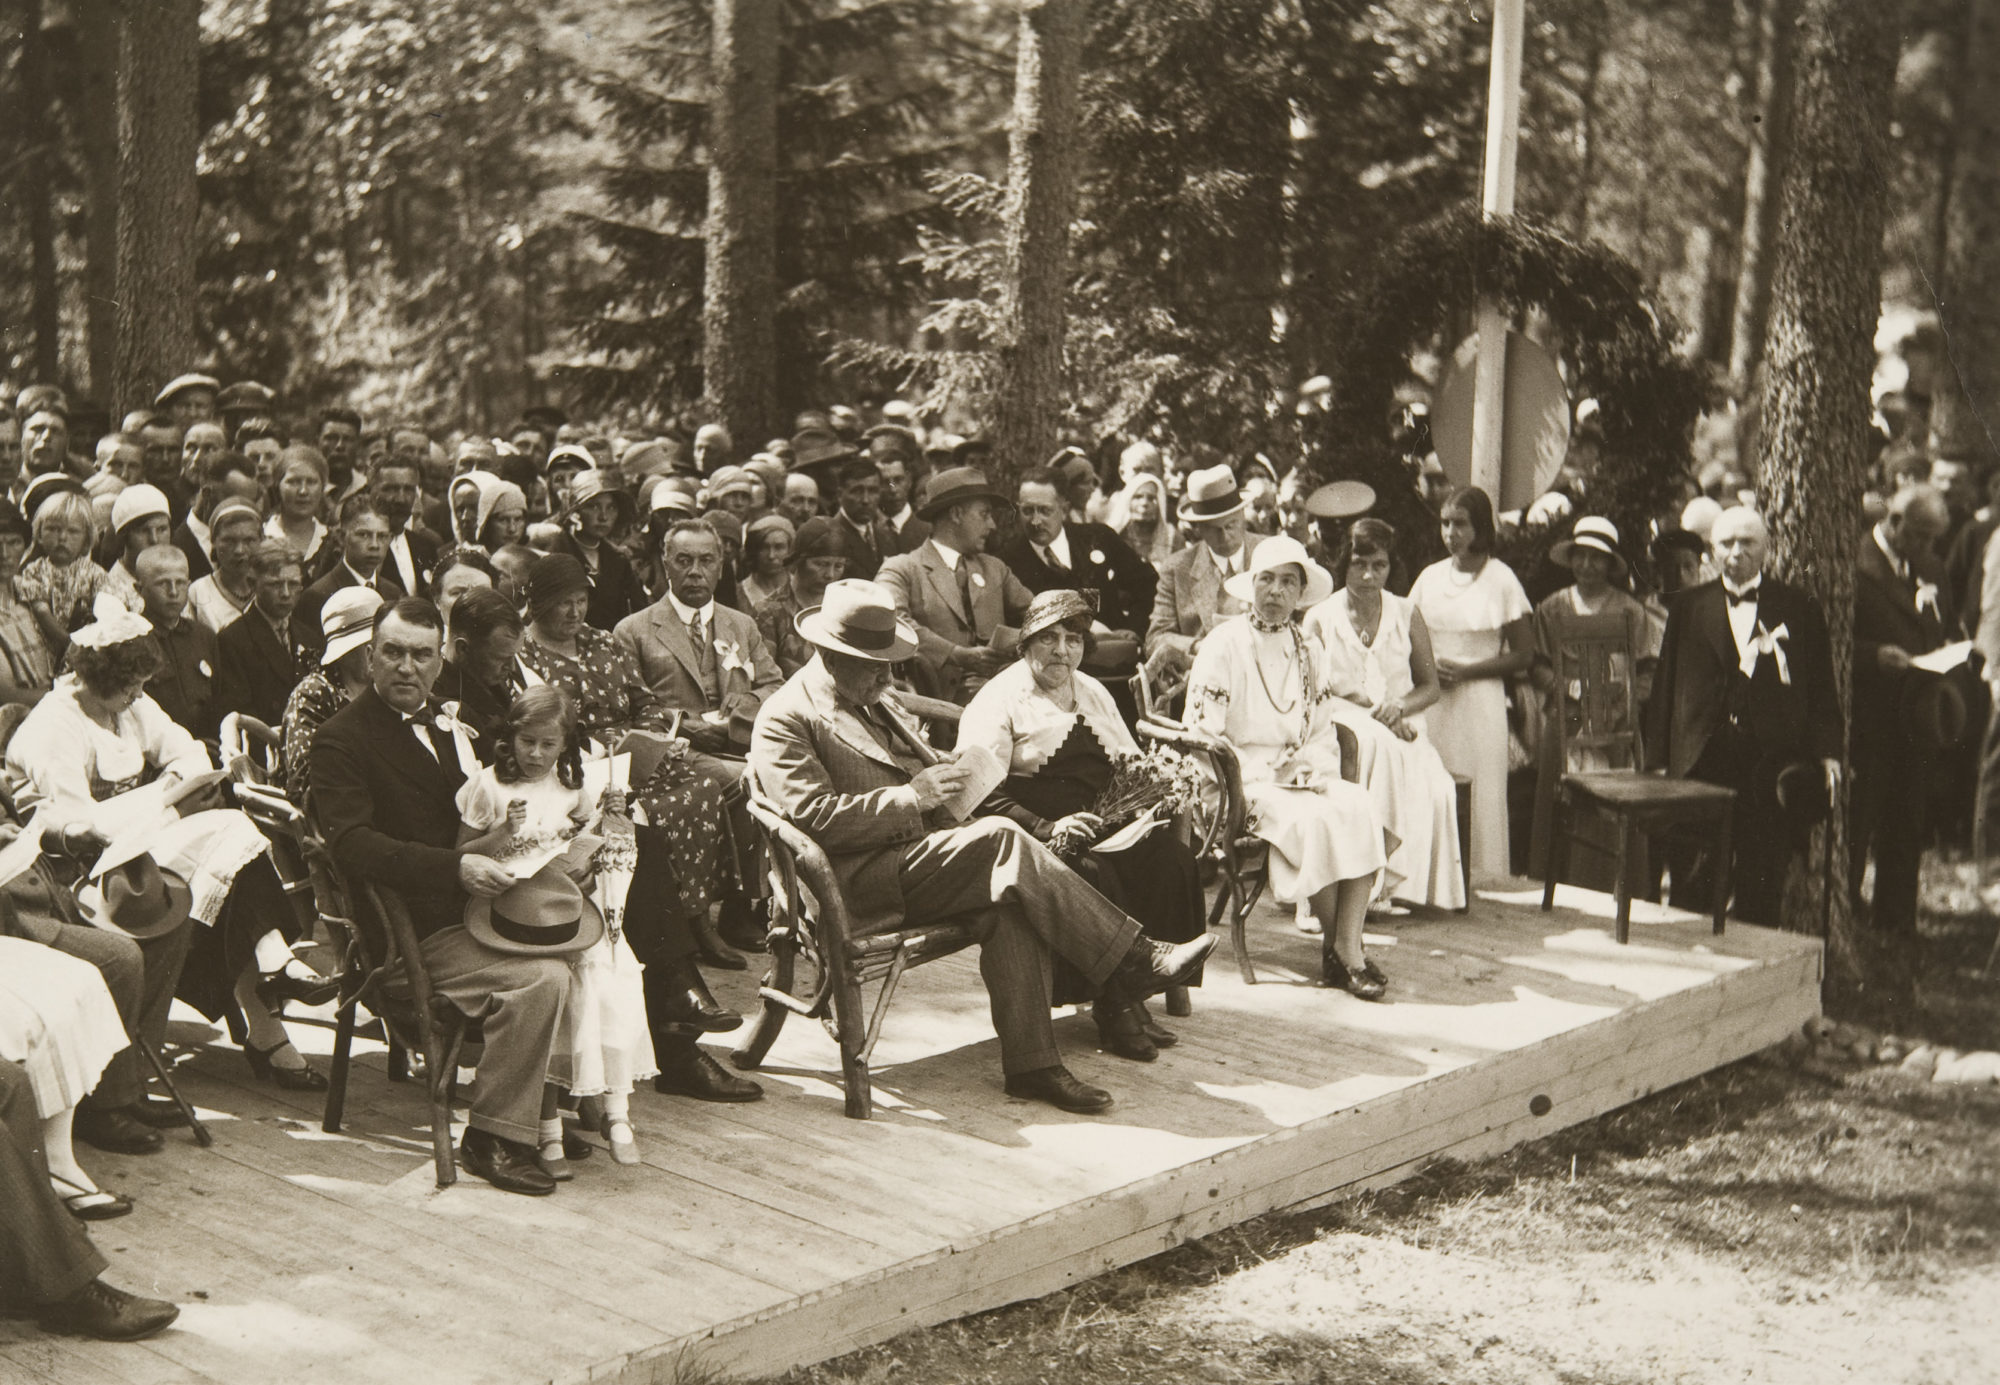 Summer party of the regional museum association at the Saari folk park in the early 1930’s. In the middle President P.E. Svinhufvud next to Erik von Frenckell and his daughters. © Museovirasto